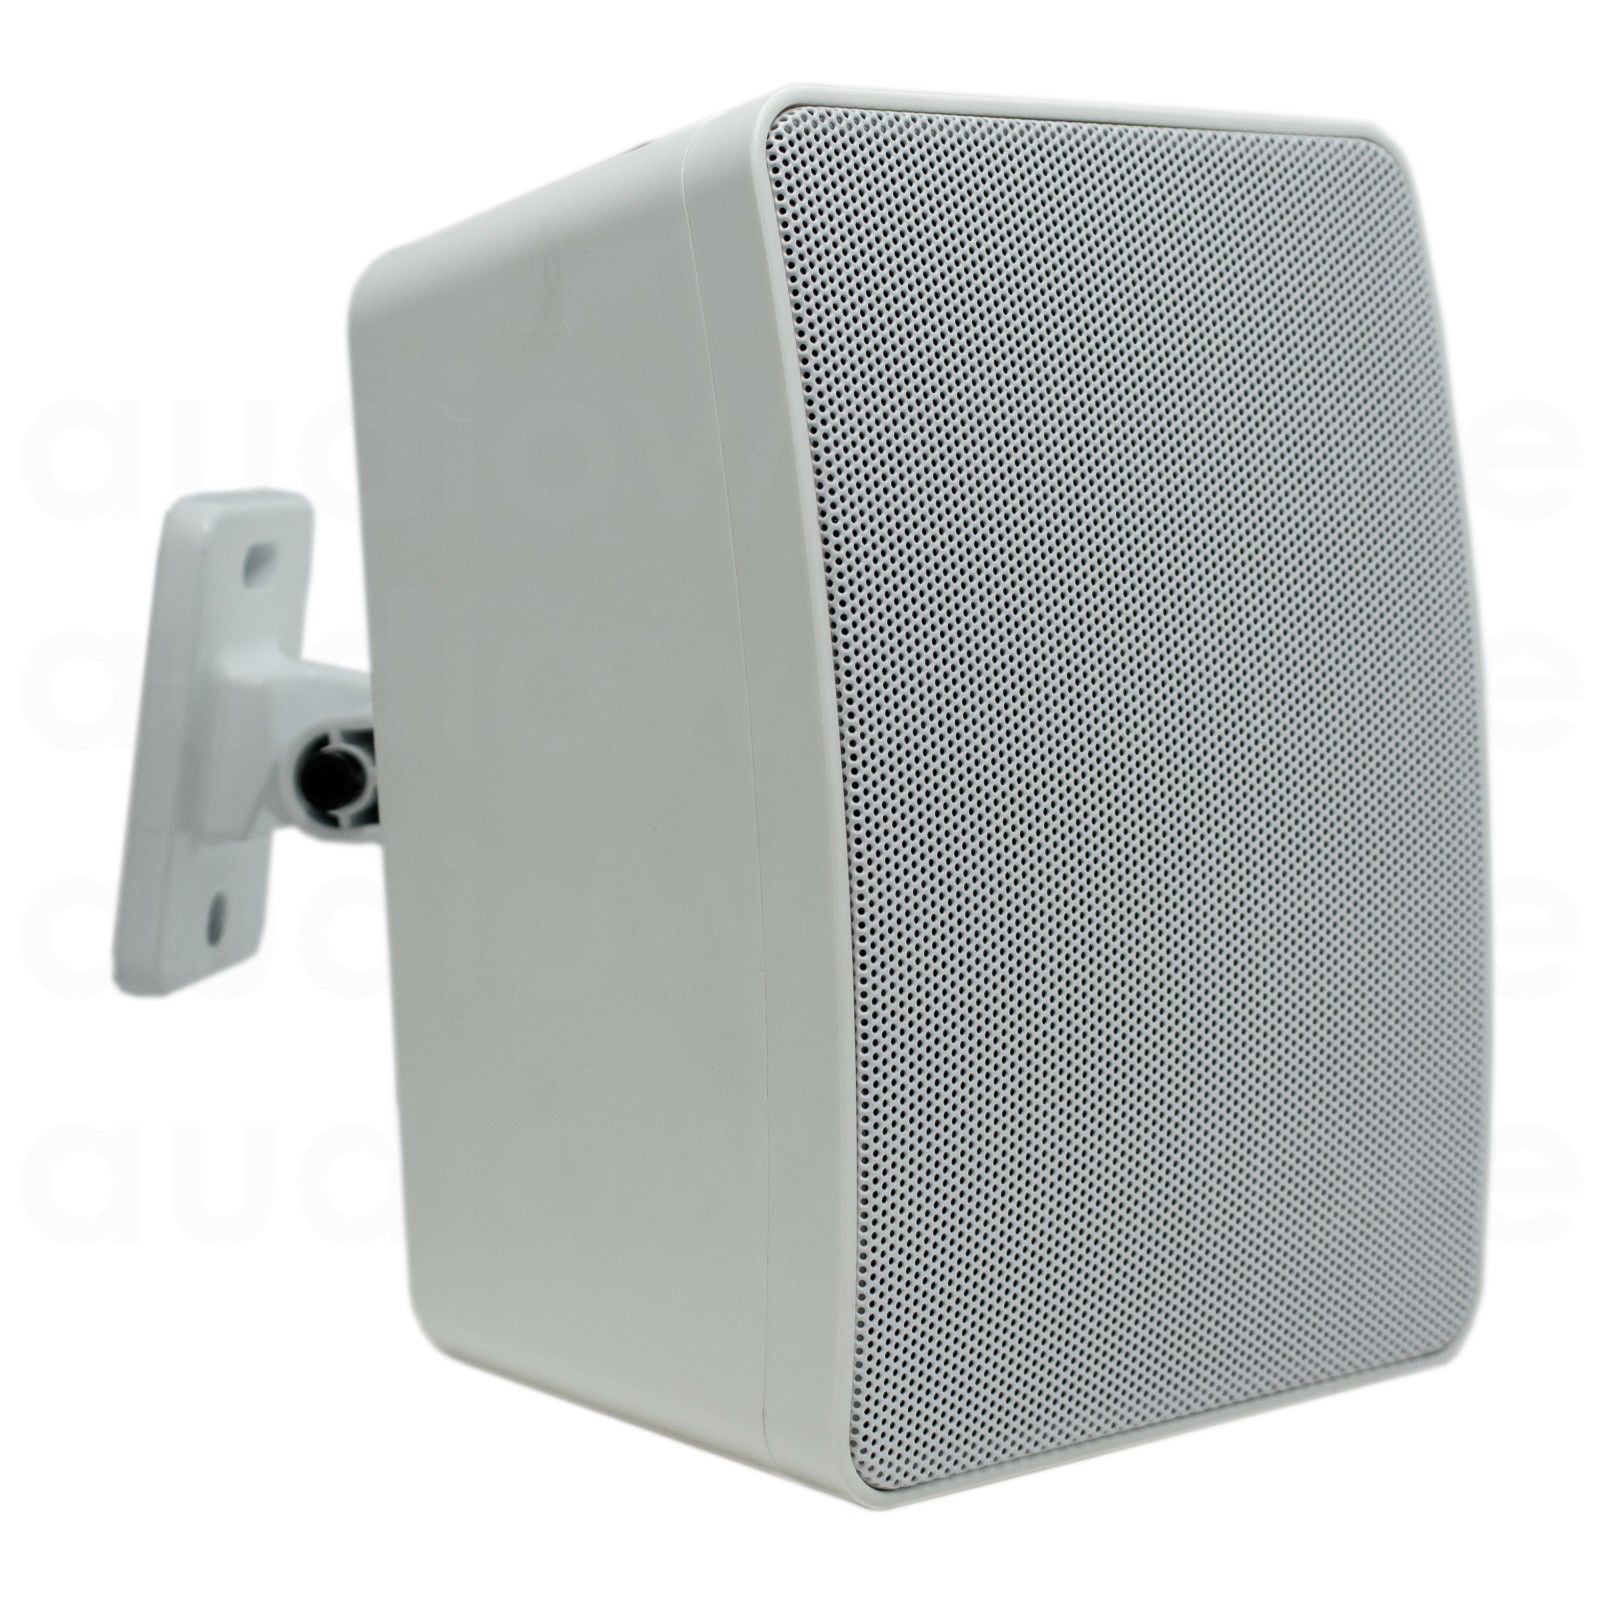 1 Speaker Perfect for: Restaurant/Outdoor/Temple/Patio/Pool/Meeting Room/Church/Coffee Shop New EMB ECW10 100 Watts Full Range Outdoor Speaker/Environmental/Monitor White 